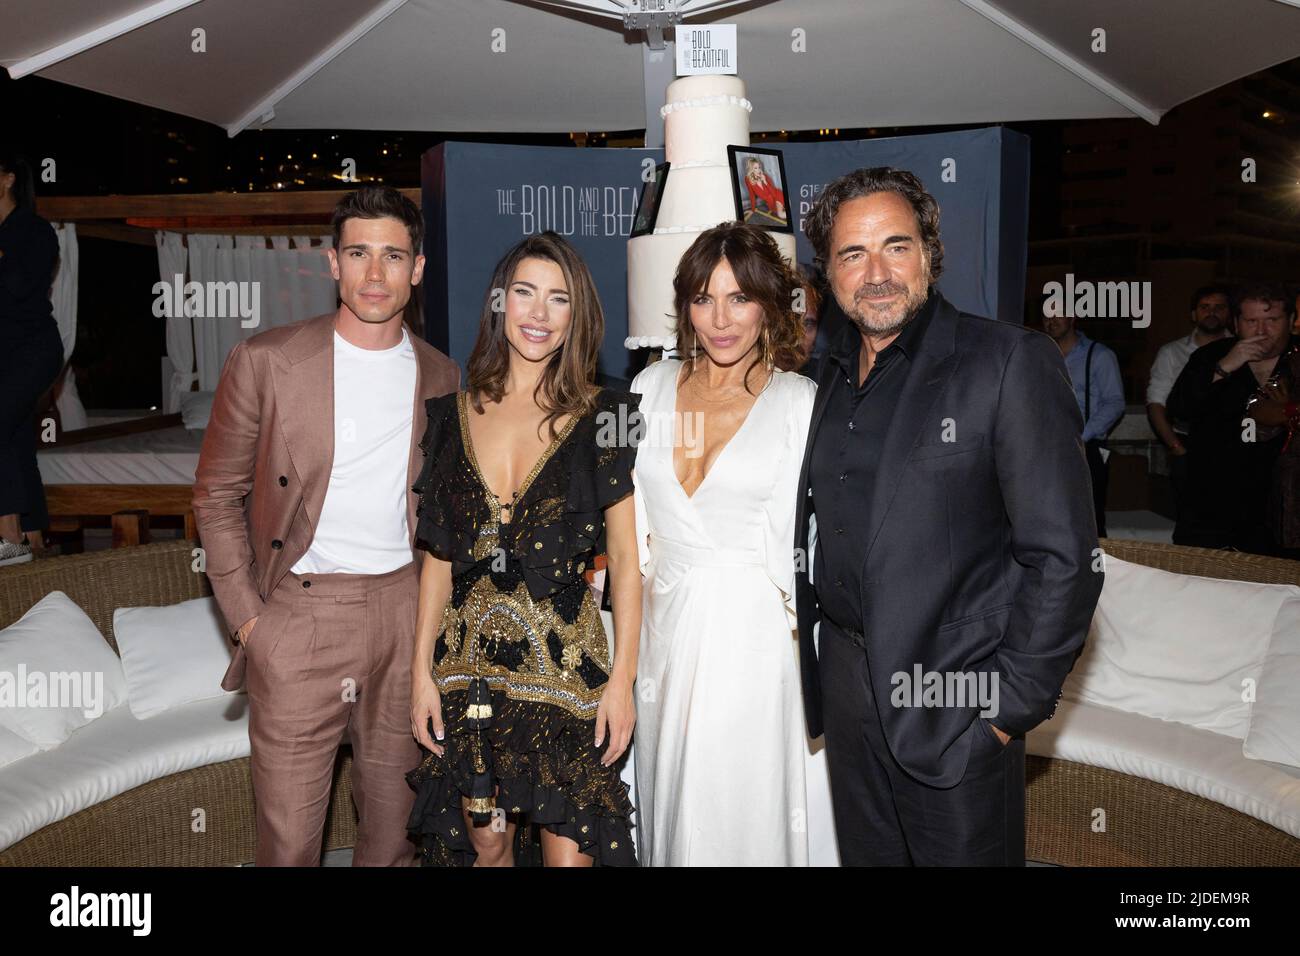 Monte-Carlo, Monaco, June 19, 2022.‘The Bold and the Beautiful’ cast members Tanner Novlan, Jacqueline Macinnes Wood, Thorsten Kaye, Krista Allen attend the 35th anniversary of the TV series during the 61st Television Festival of Monte-Carlo ‘Nominees Party’ at the Fairmont hotel, in Monte-Carlo, Monaco, on June 19, 2022. Photo Pool FTV/ABACAPRESS.COM Stock Photo